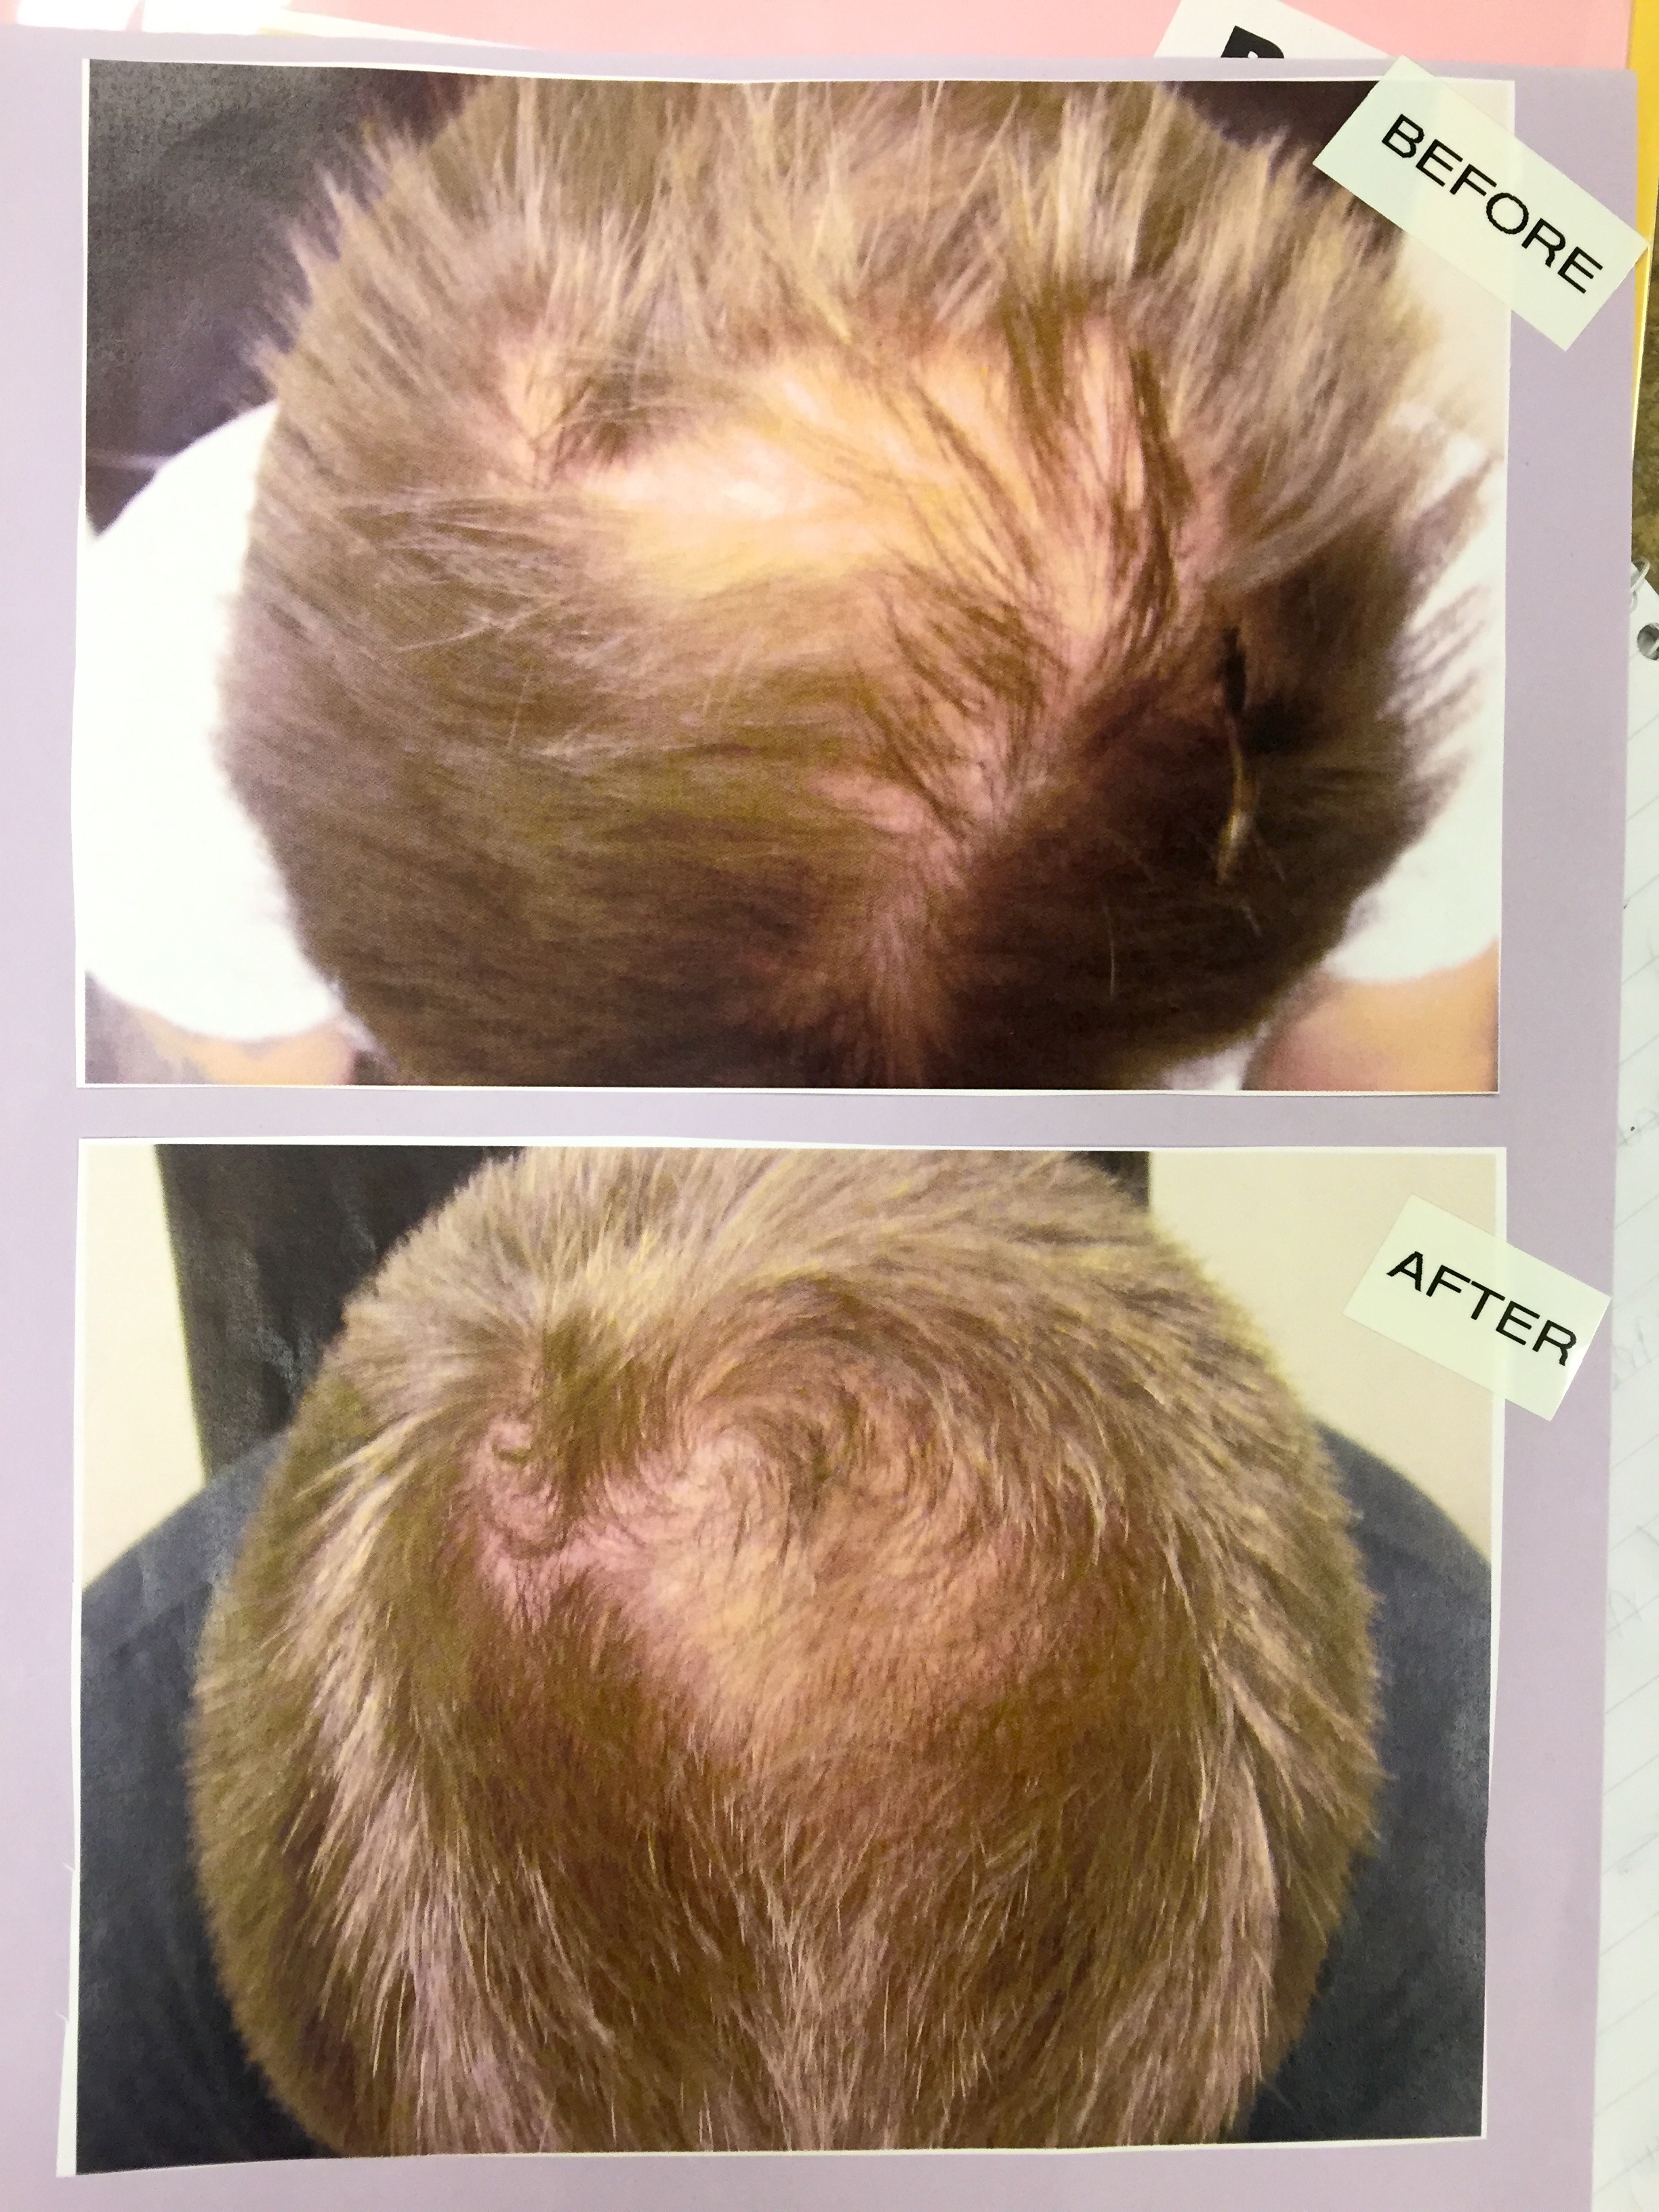 laser therapy for hair loss pictures, photos